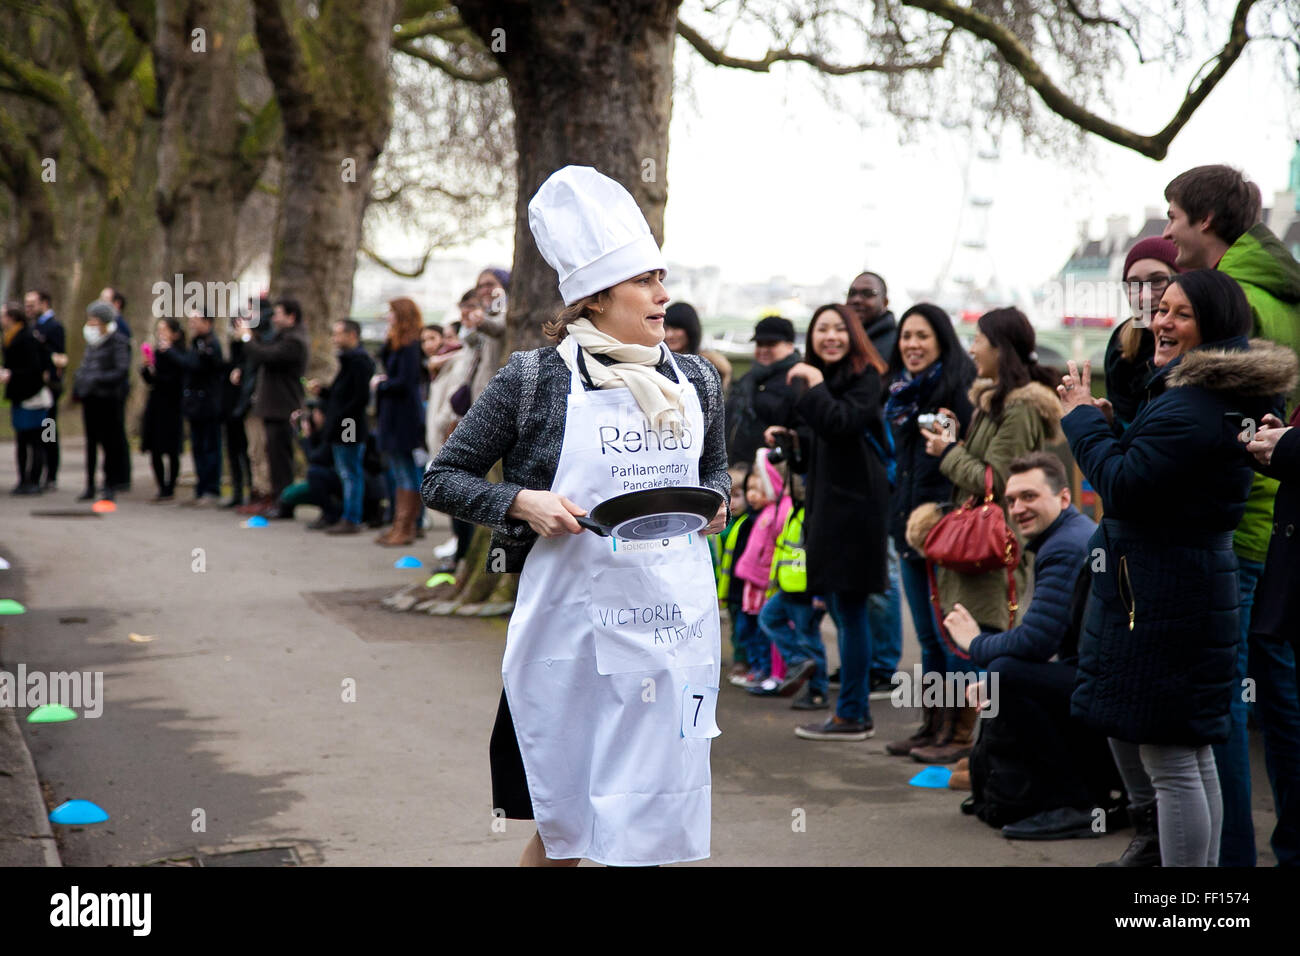 Westminster, London, United Kingdom. February 9th, 2016 - Victoria Atkins MP runs at the Parliamentary pancake race in aid of the disability charity, Rehab  Credit:  Dinendra Haria/Alamy Live News Stock Photo